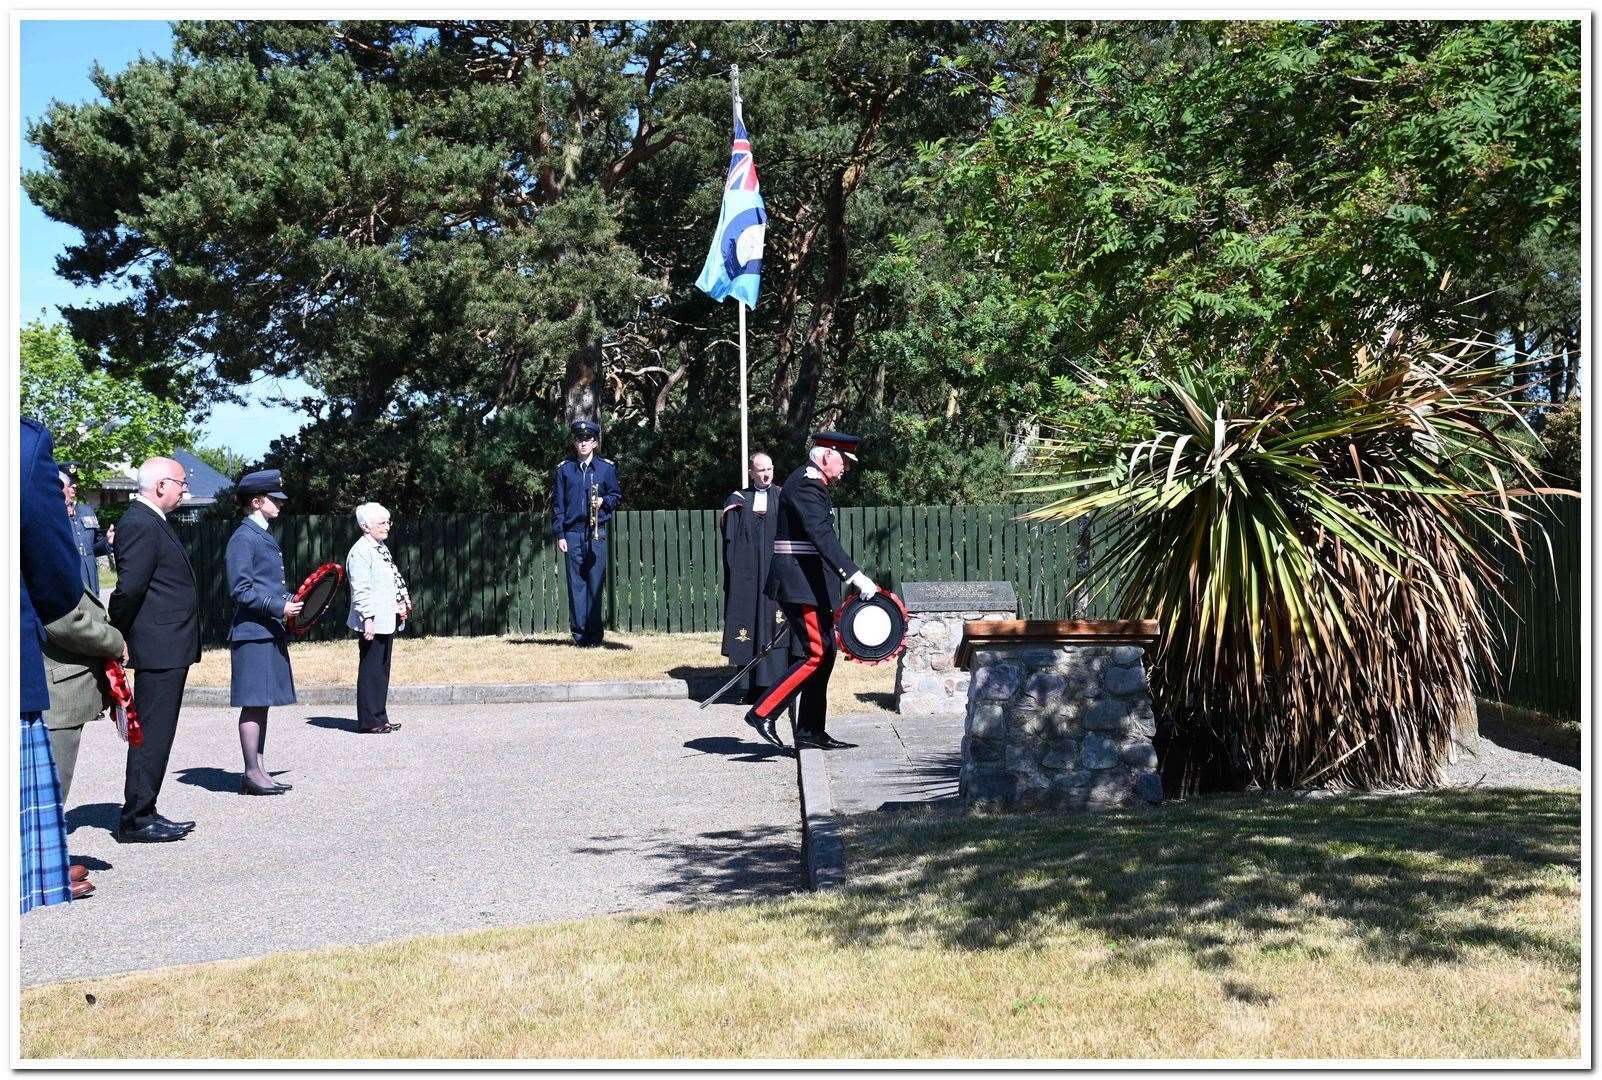 Lord Lieutenant of Moray, Seymour Monro, places a wreath at the war memorial.